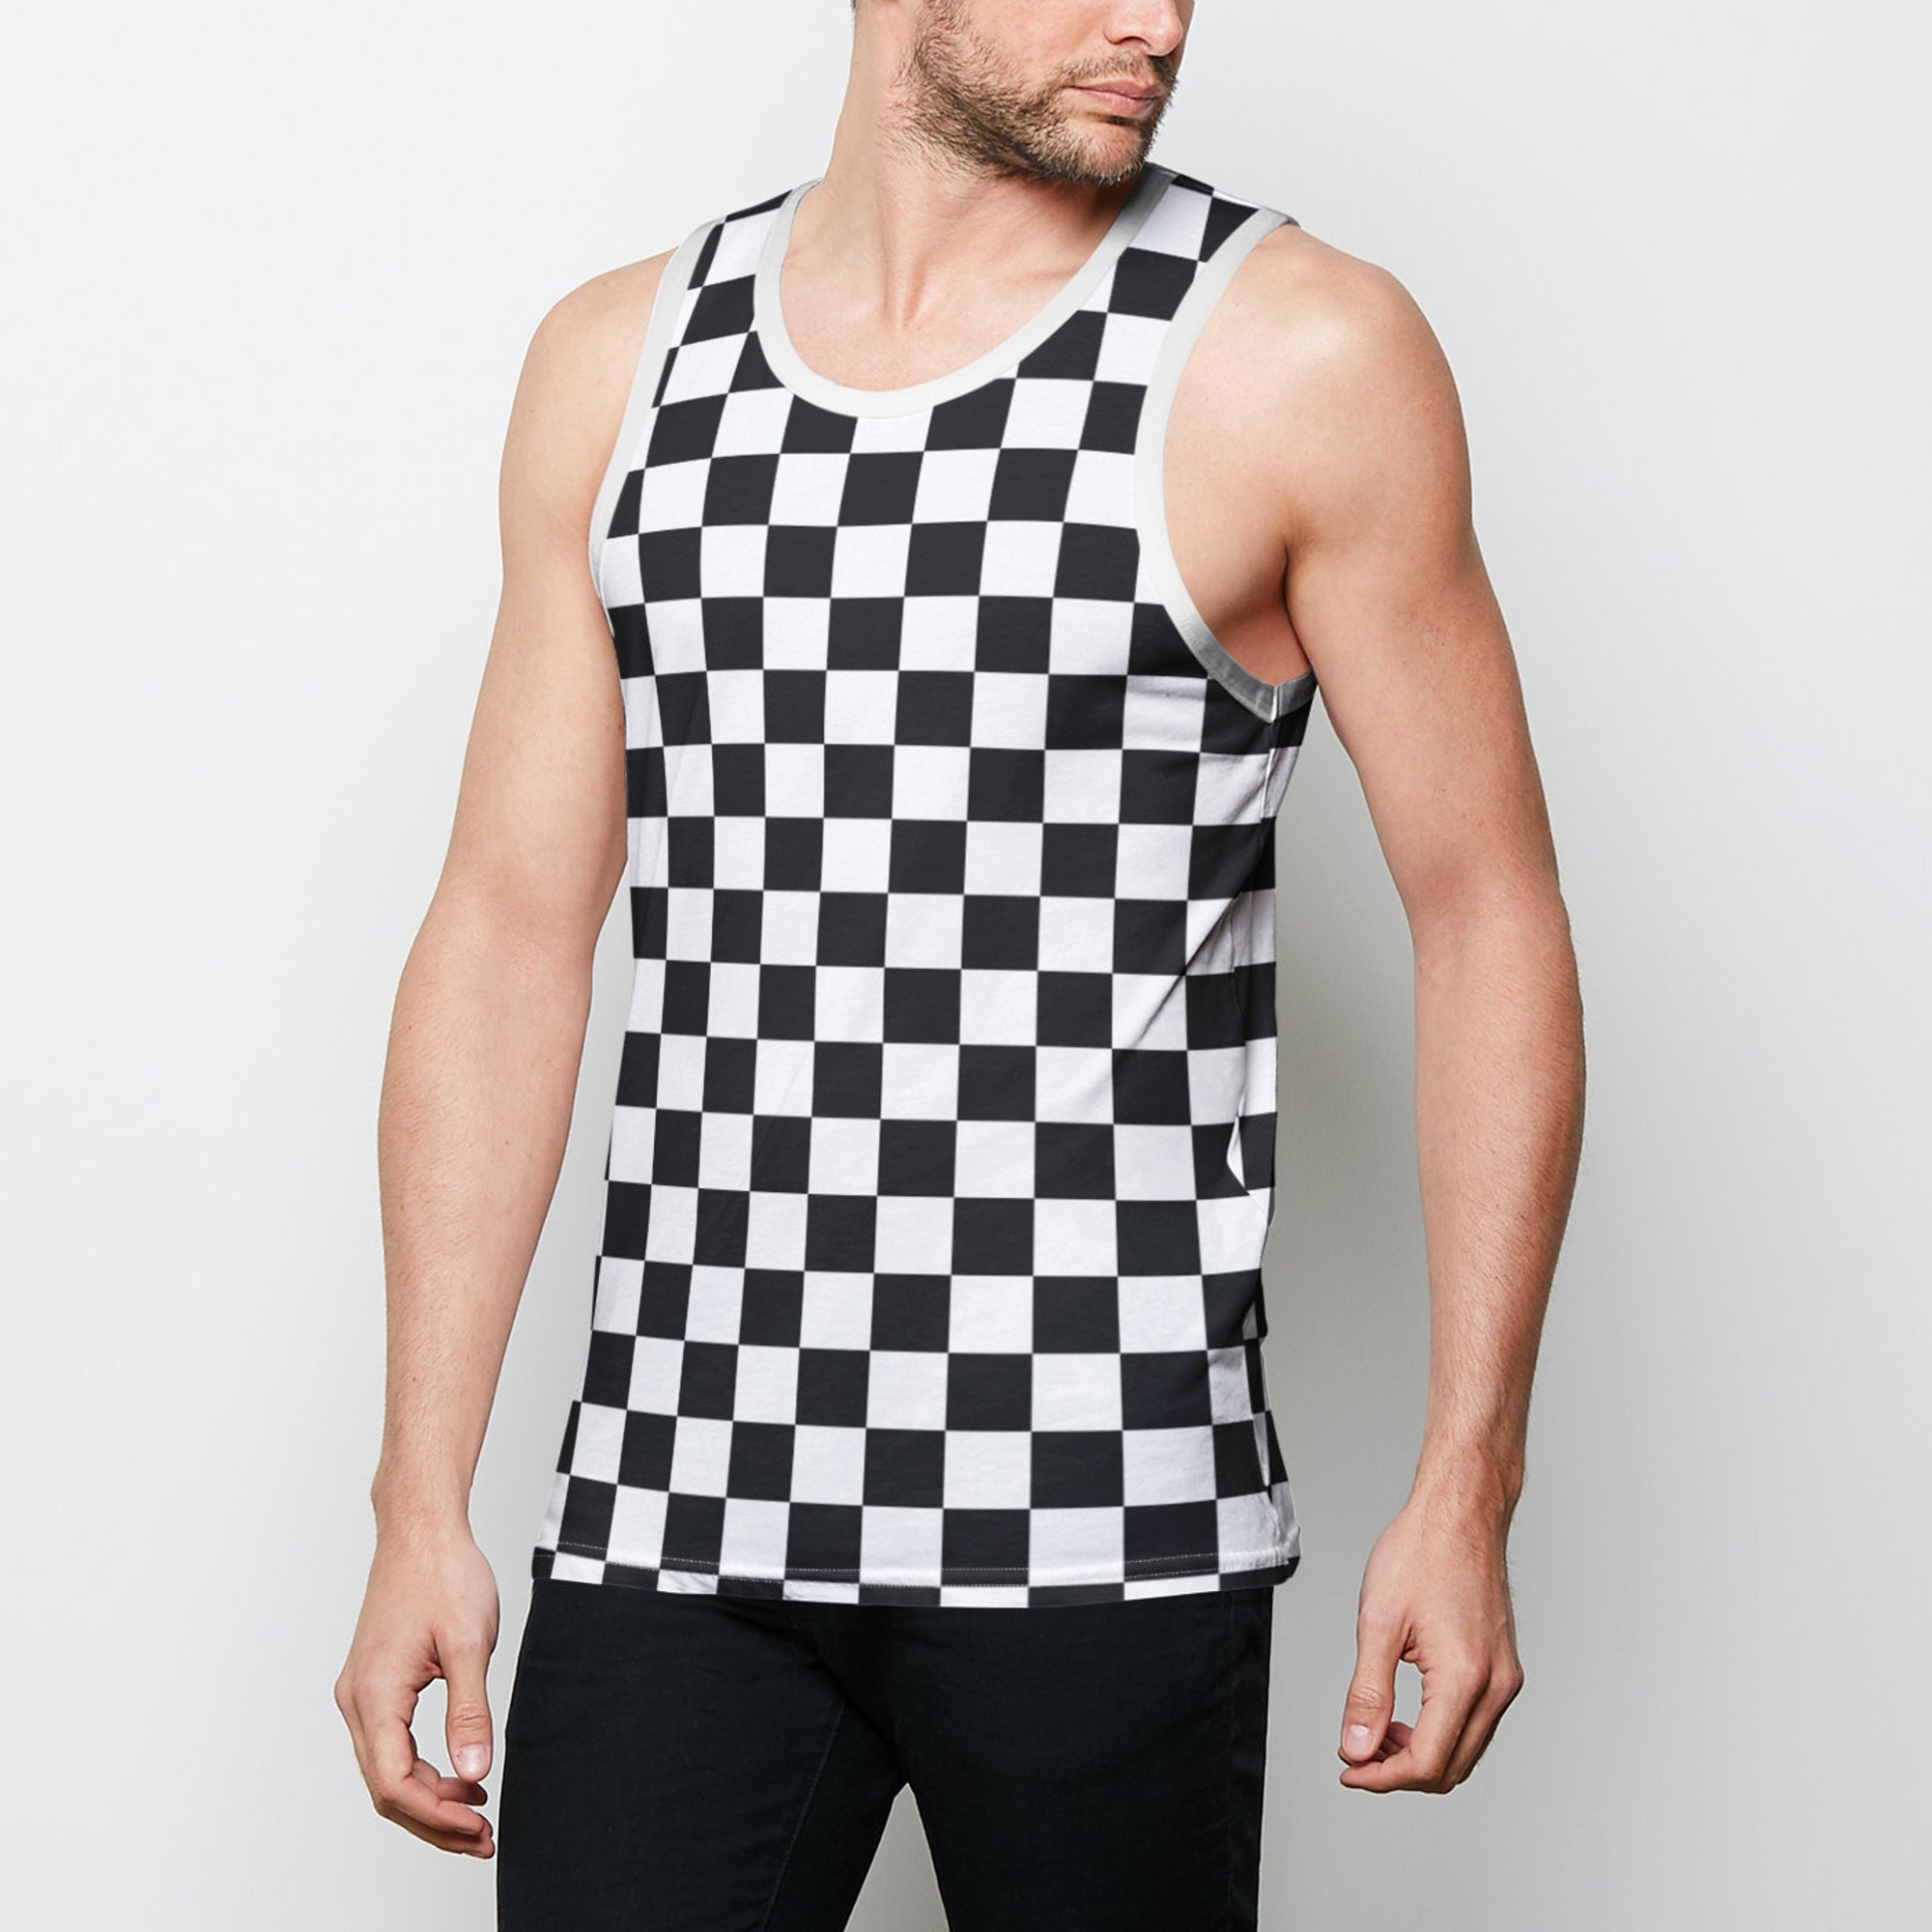 Checkered Rave 3D Tank Top